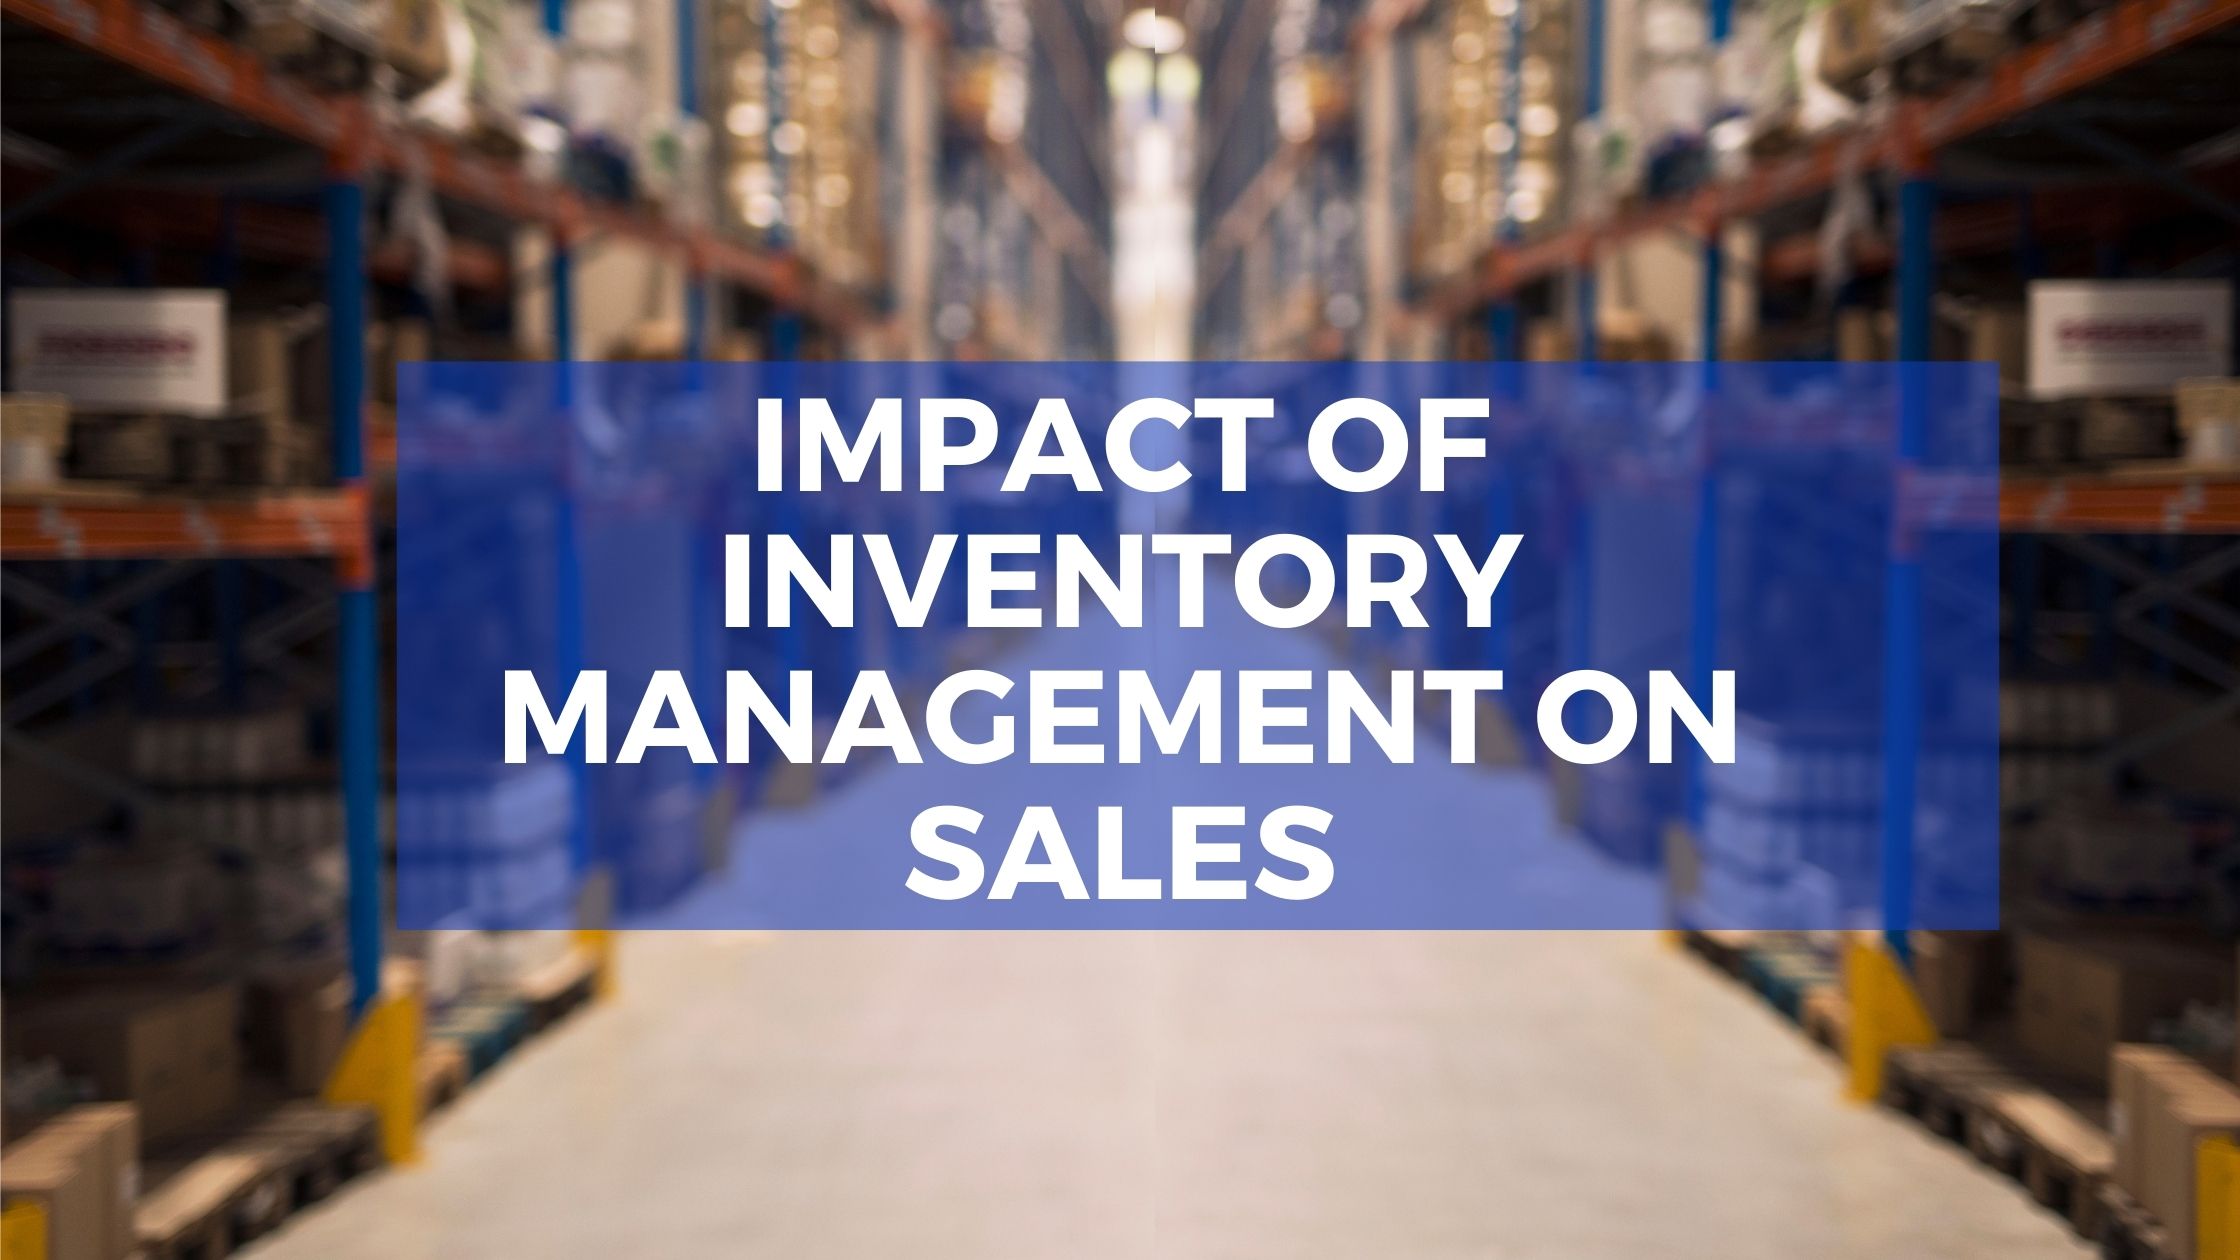 IMPACT OF INVENTORY MANAGEMENT ON SALES